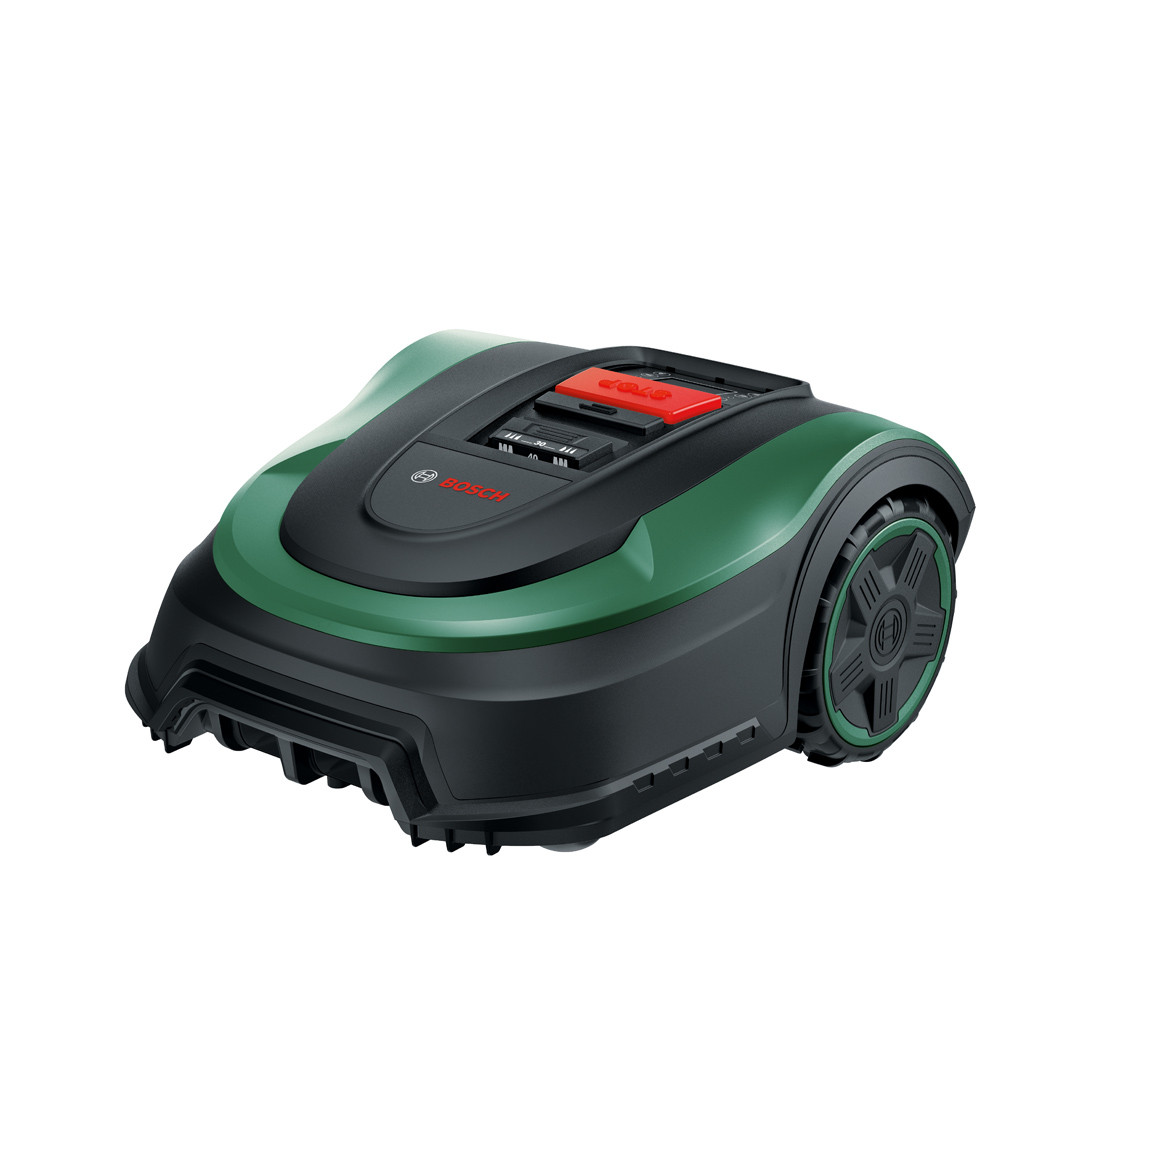 Bosch Power Tools Indego S+ 500